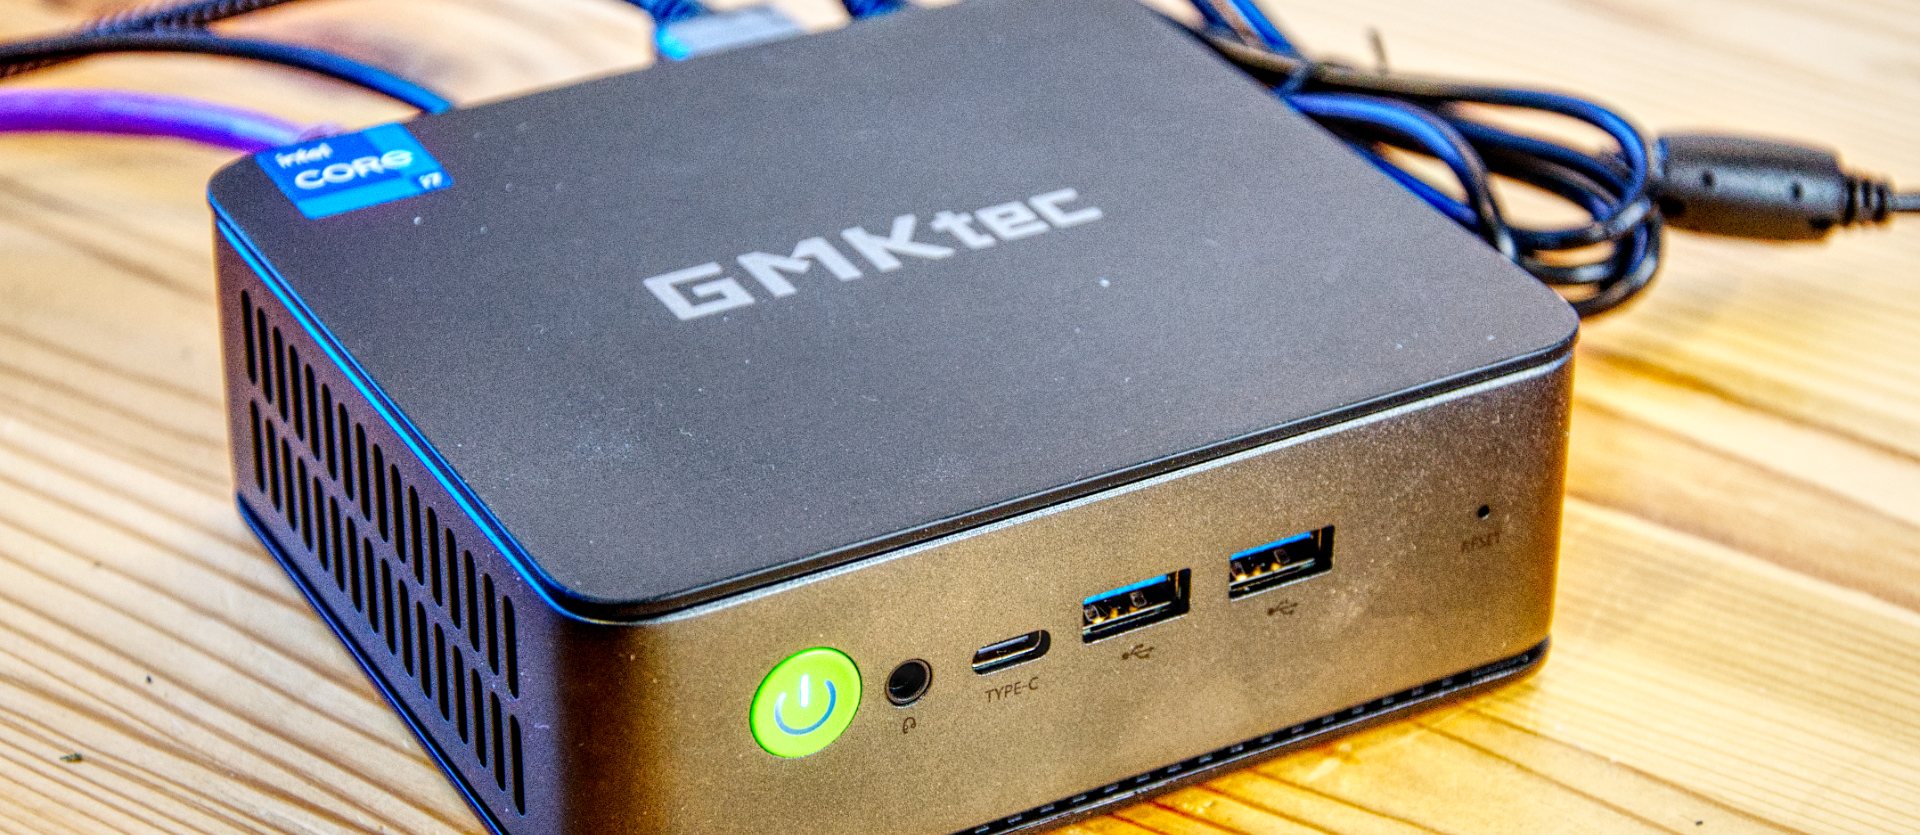 Geekom Mini IT12 review: Intel NUC competitor with an Intel Core